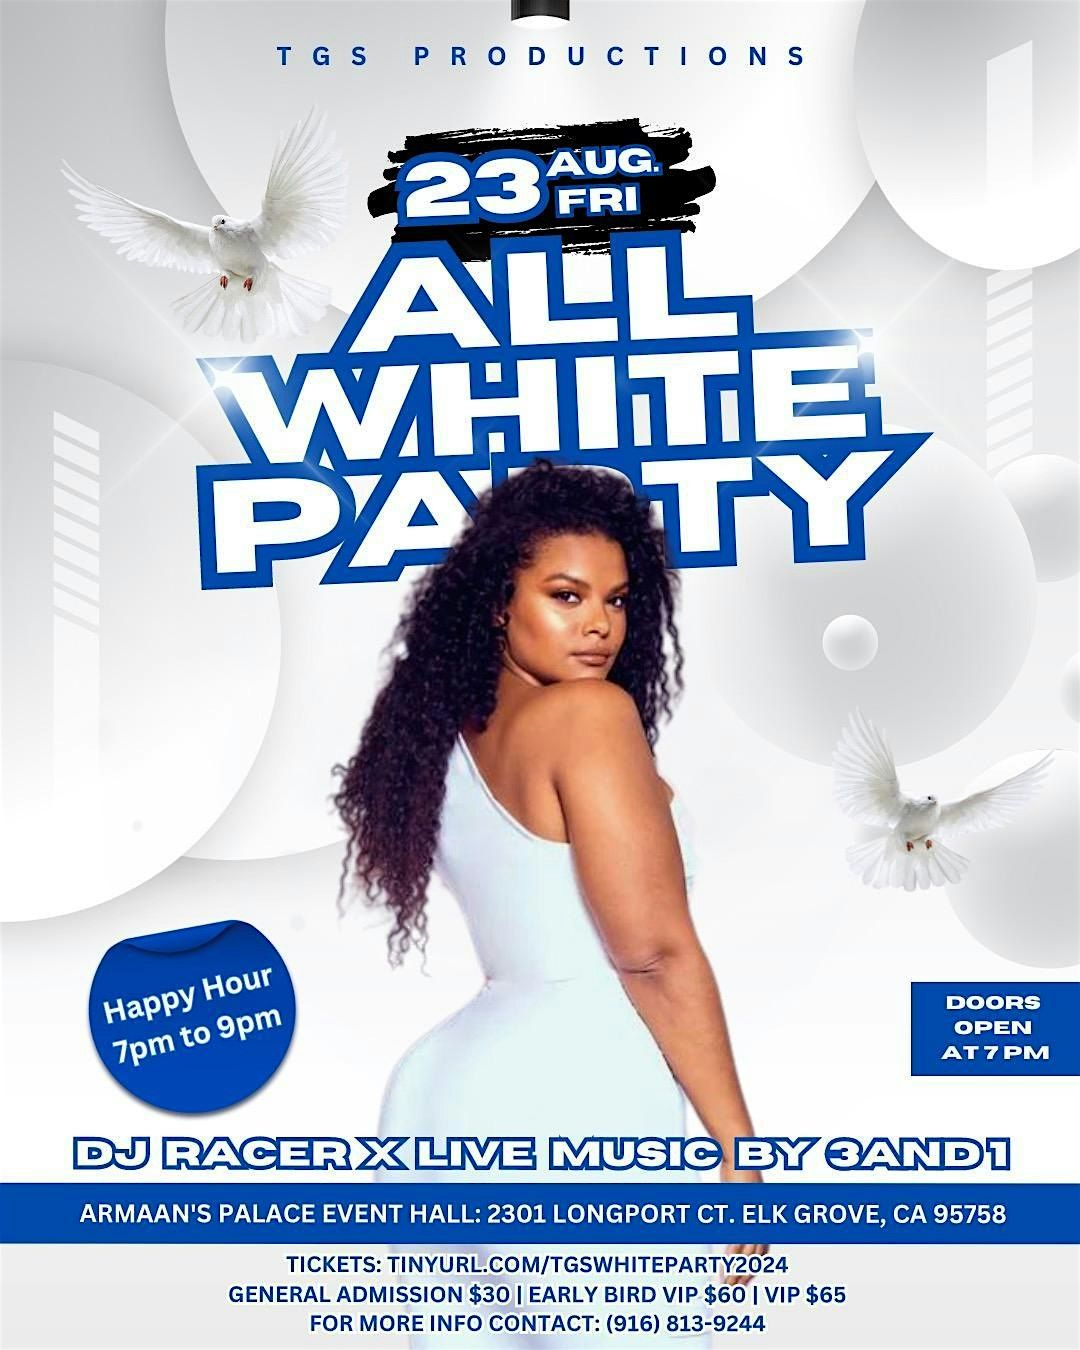 TGS Productions All White Party